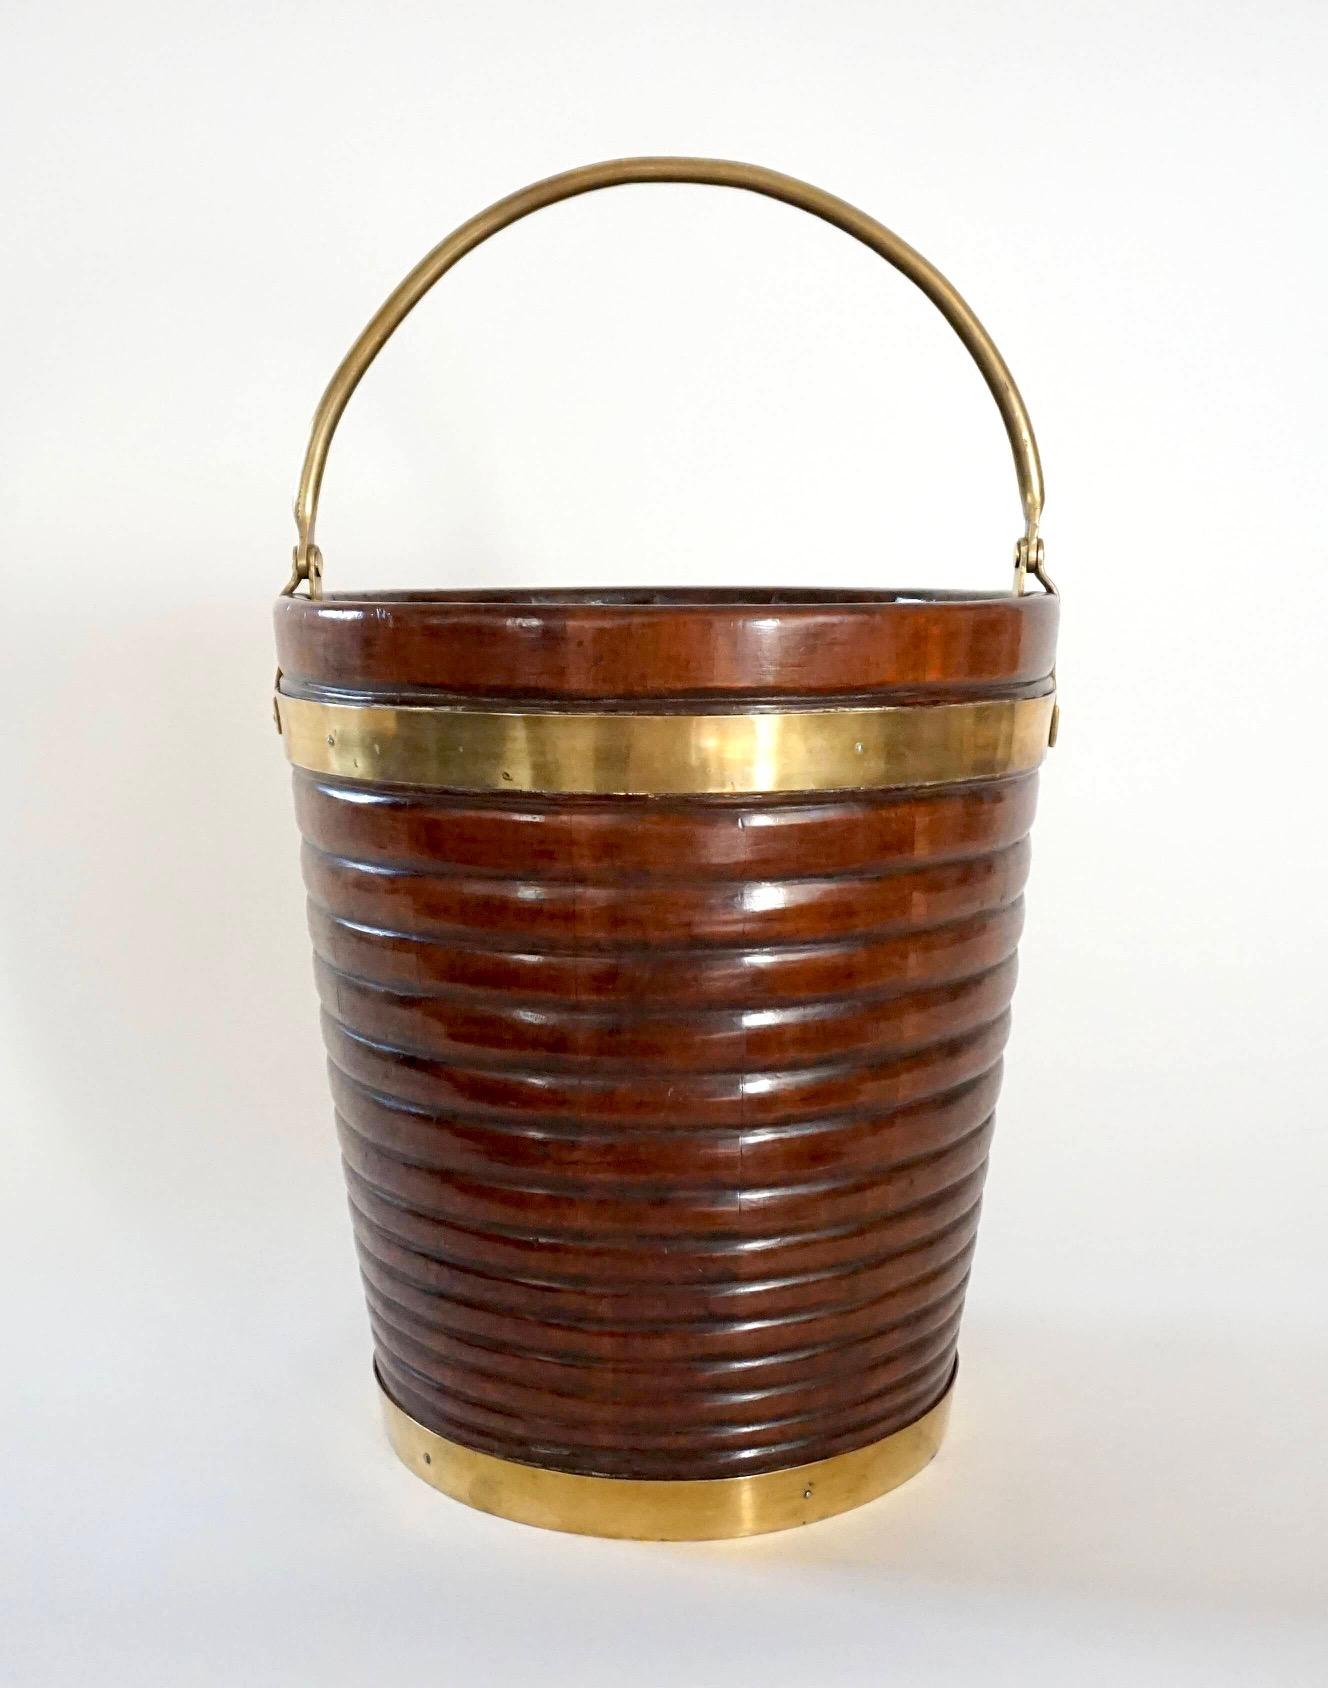 An exceptional Irish George III period mahogany and brass bound peat bucket of good size and unusual design with uniquely hinged brass swing handle; the body of tapered stave-construction with graduated ring-turned carving. Height given with handle